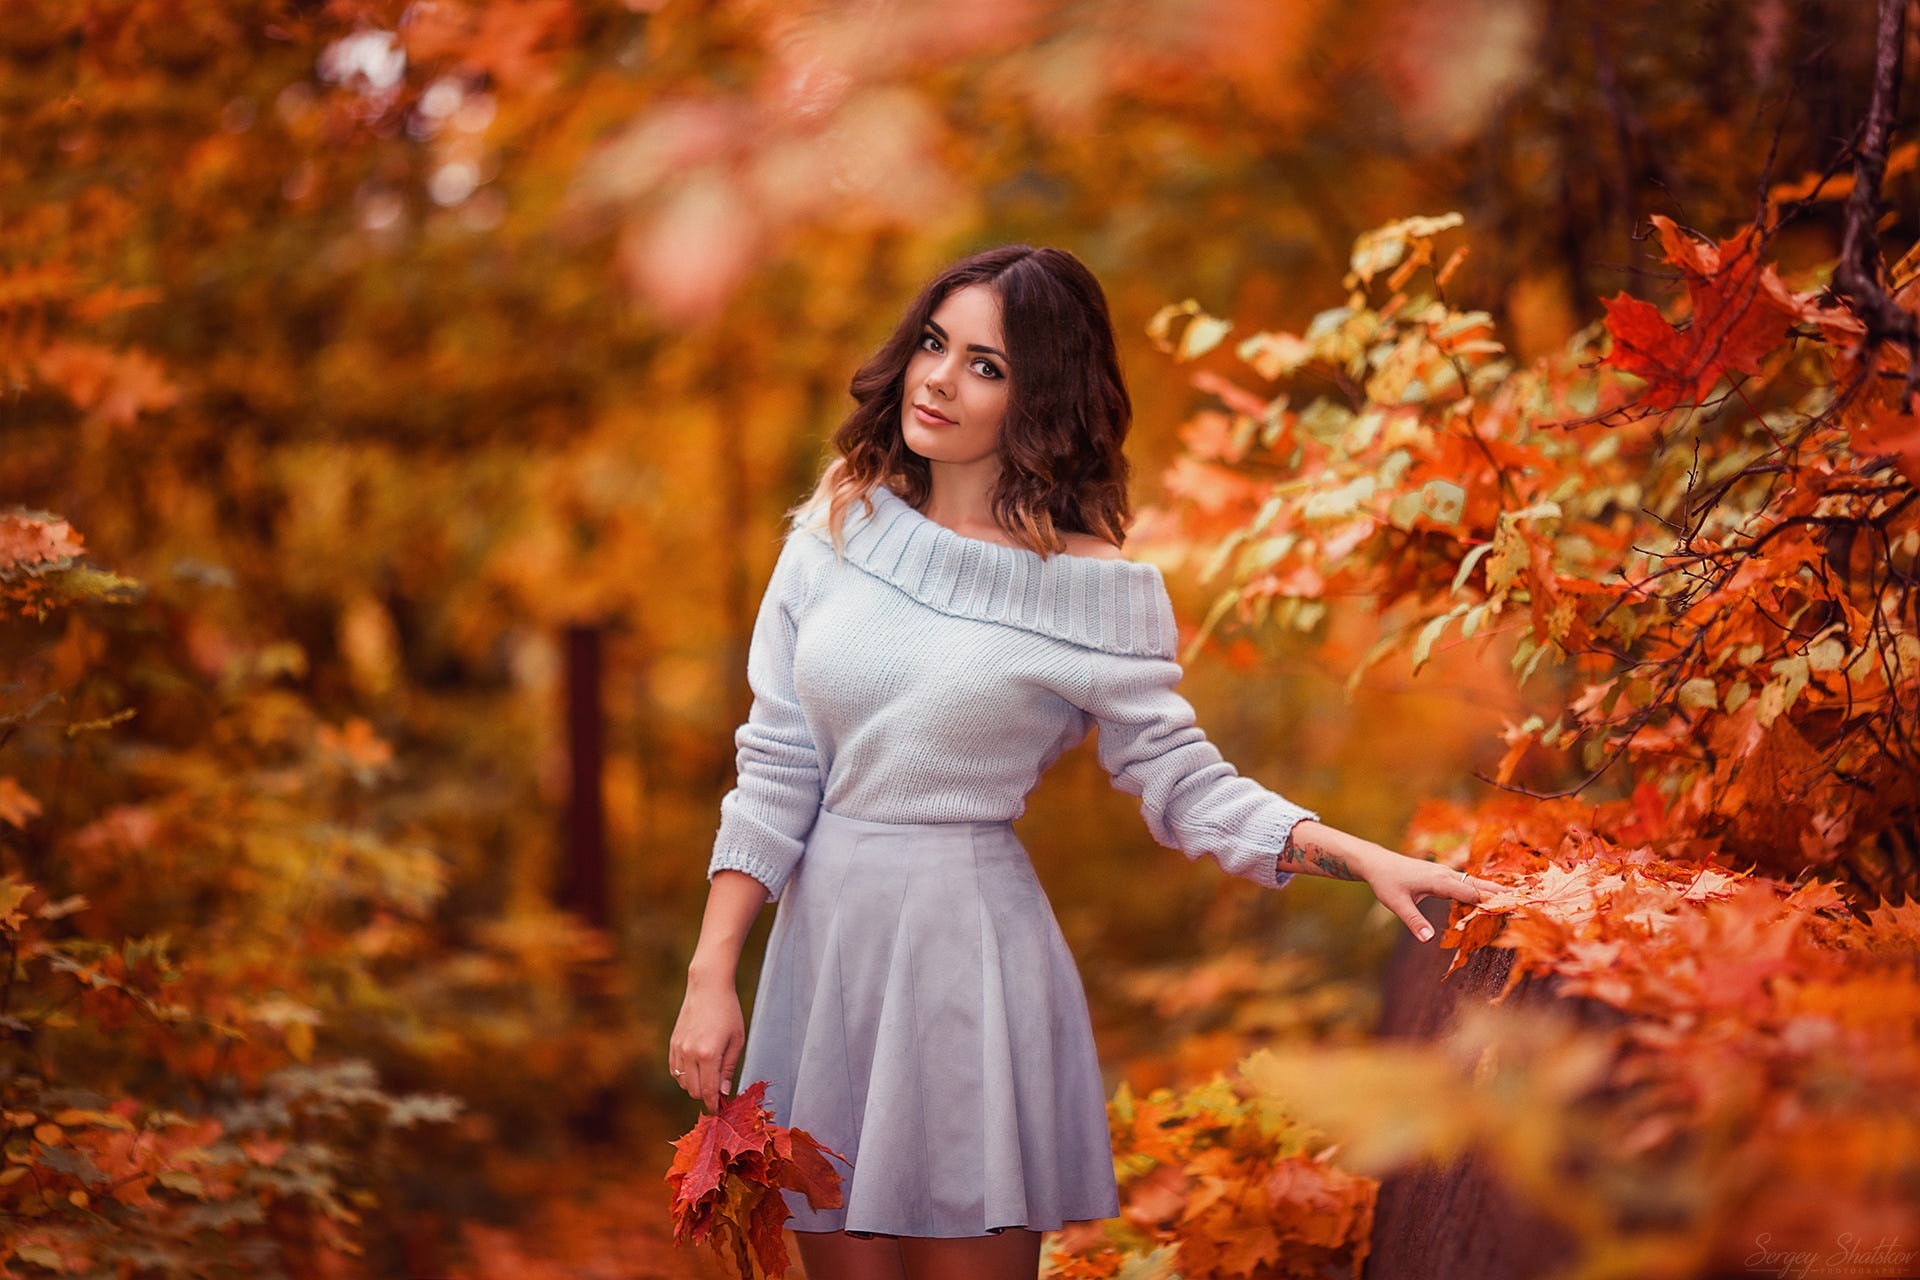 Free Download Hd Wallpaper Autumn Look Leaves Girl Park Photo Sweater Xenia Sergey 